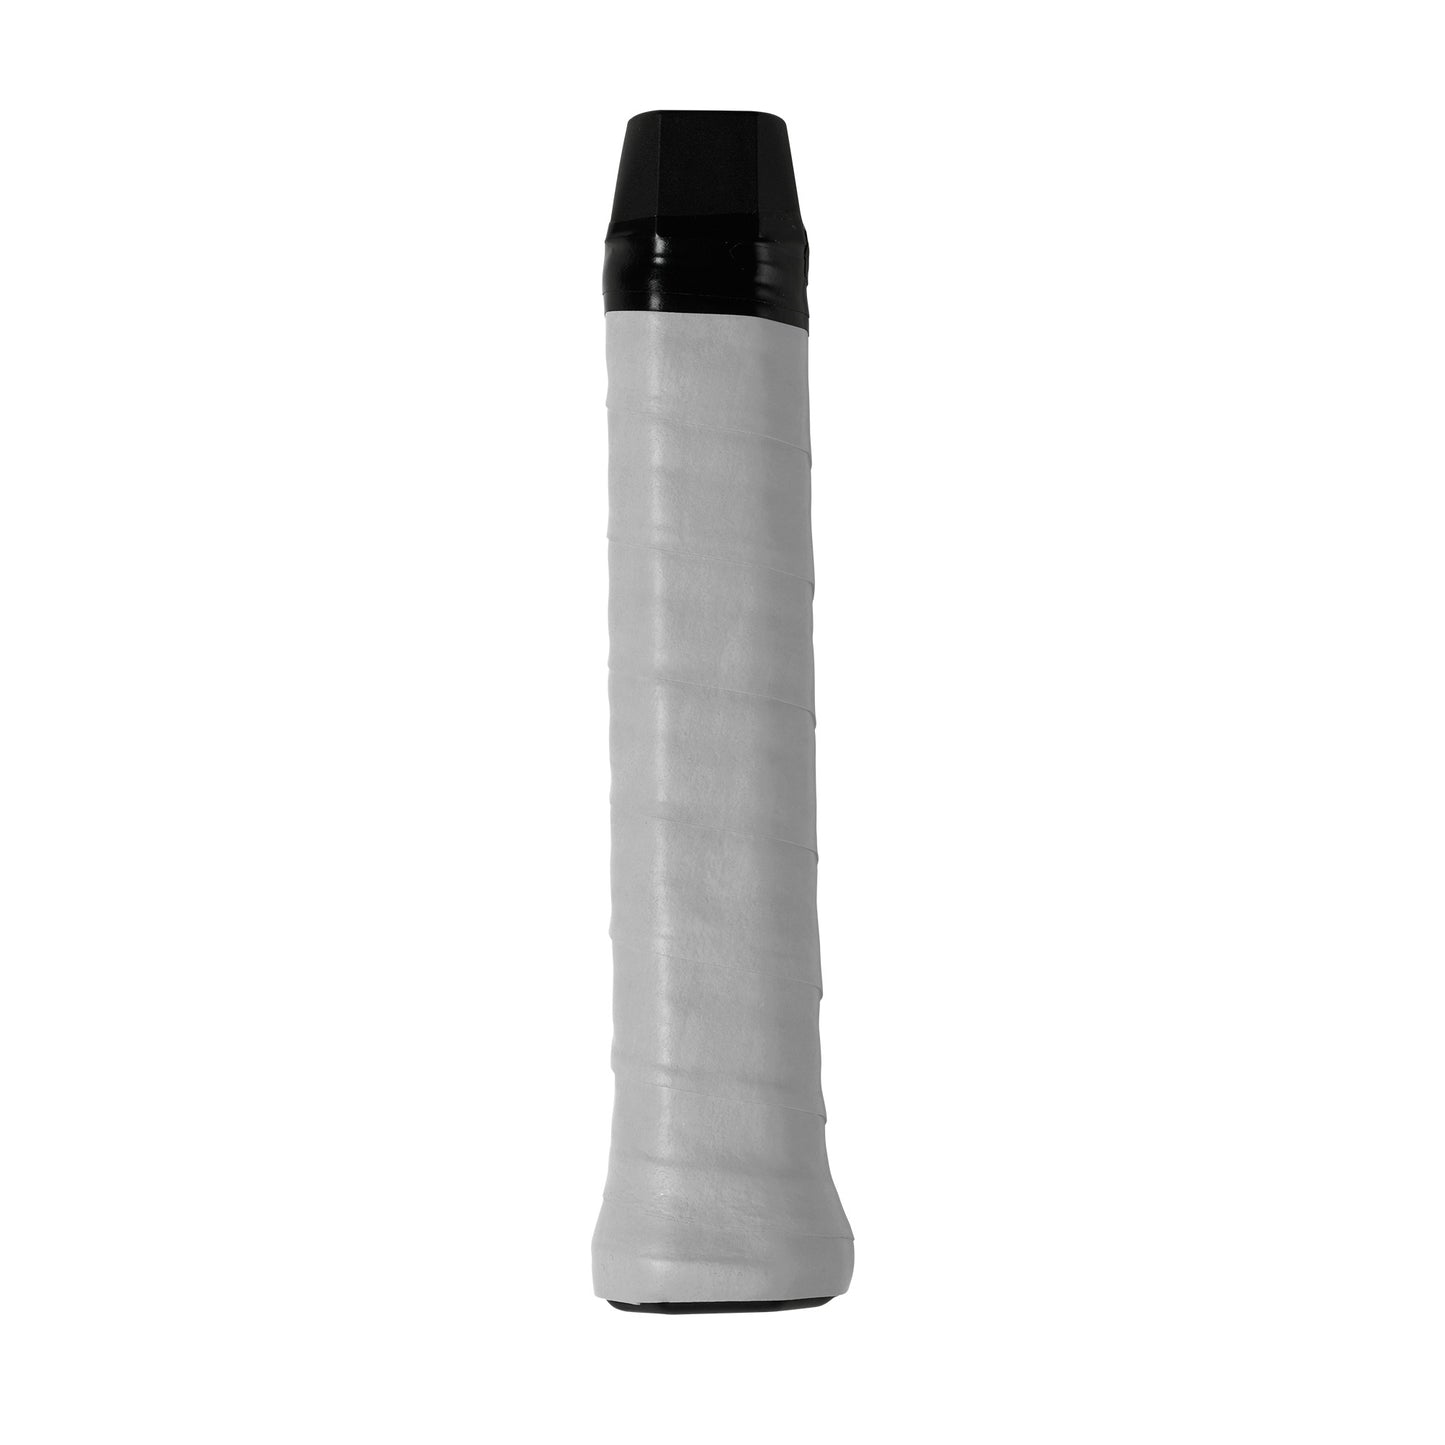 Wilson Pro Performance replacement grip